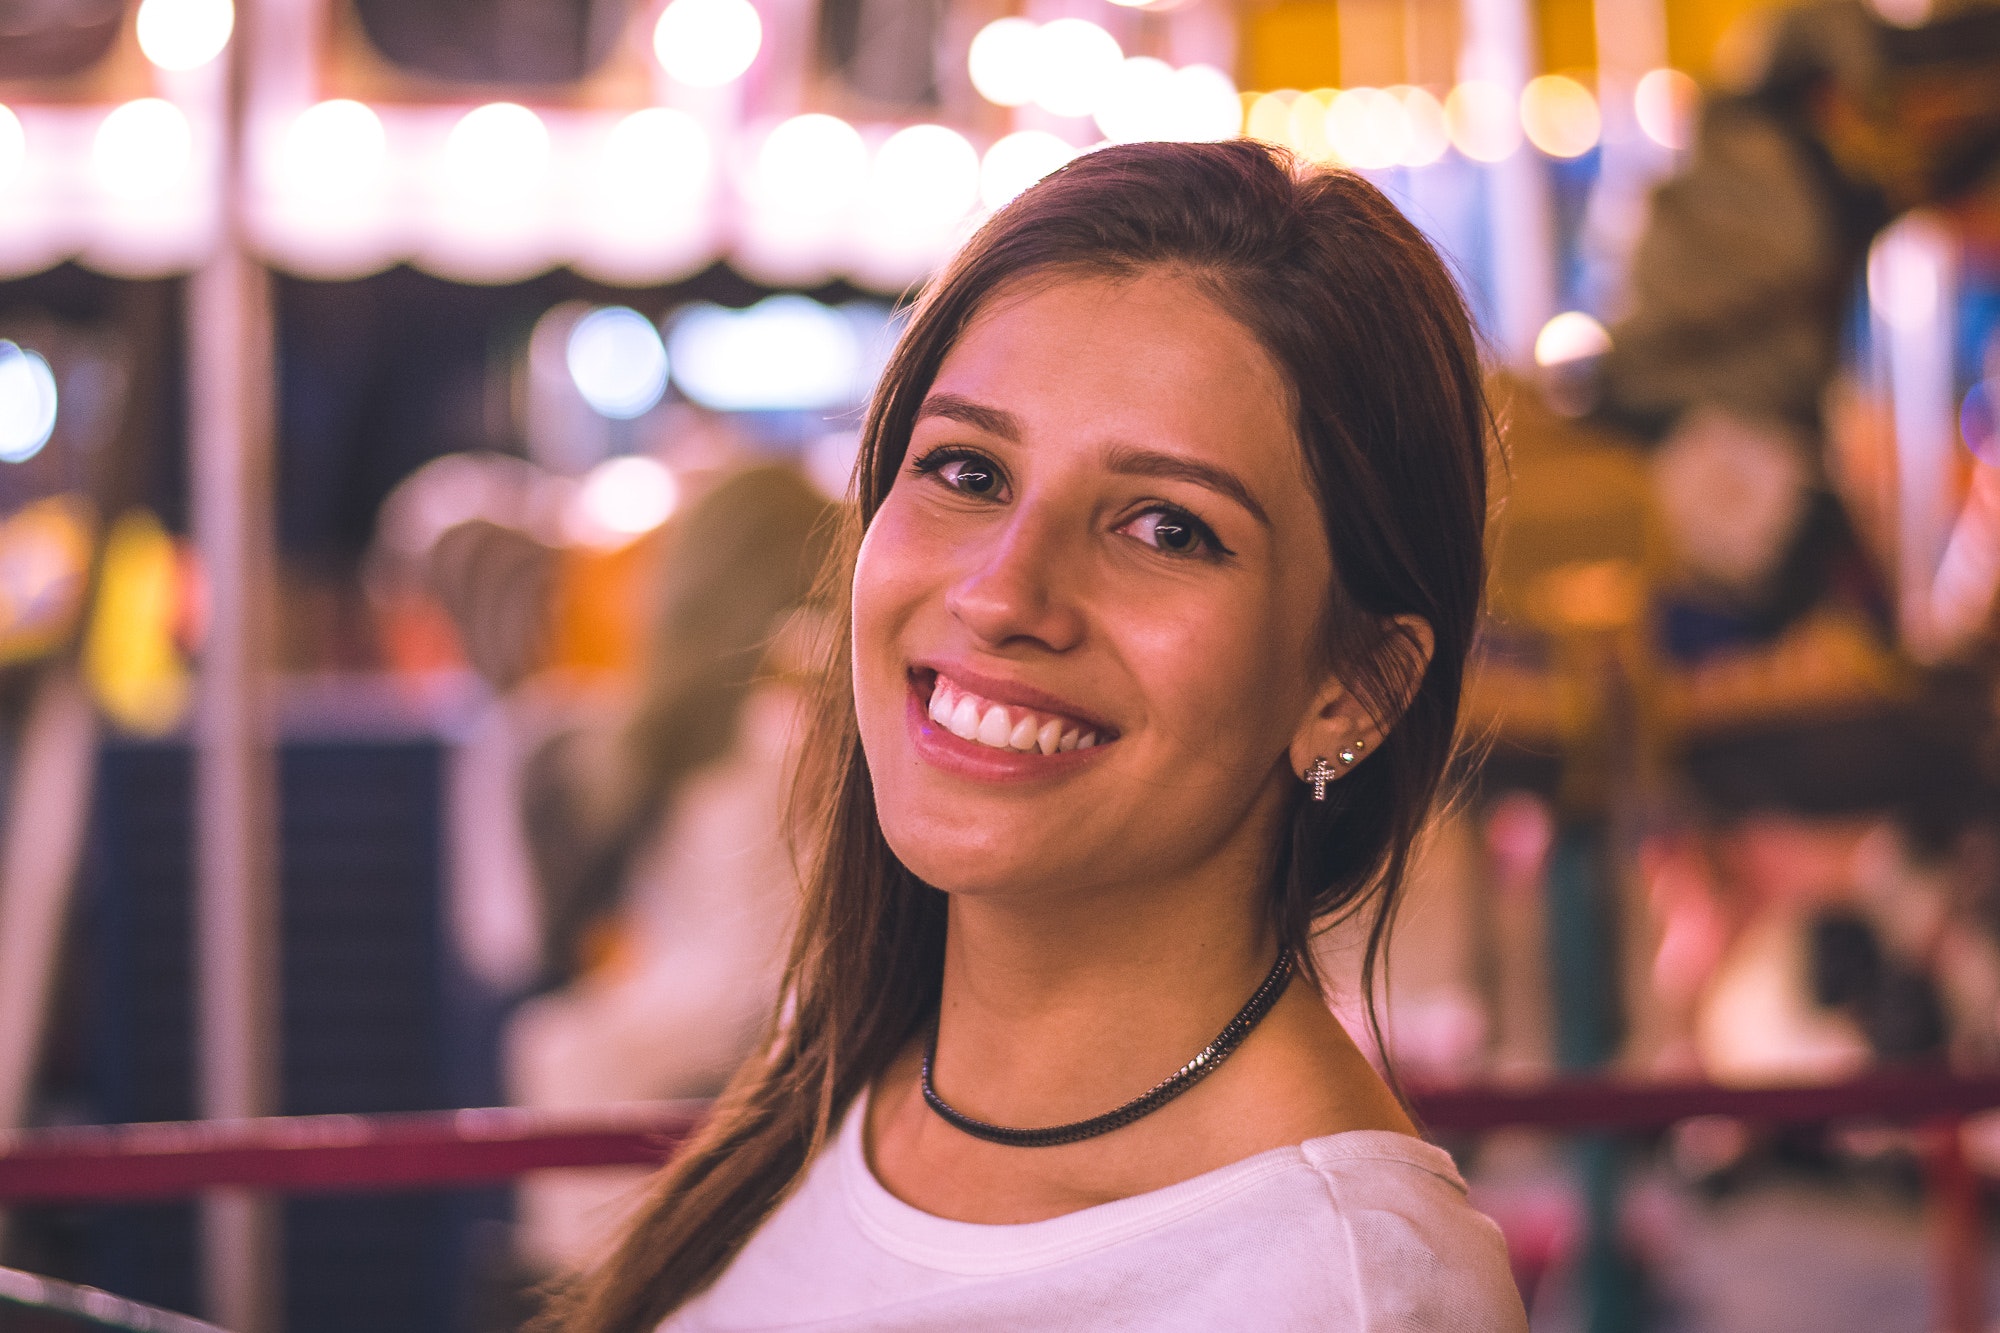 YOUNG SMILING WOMAN